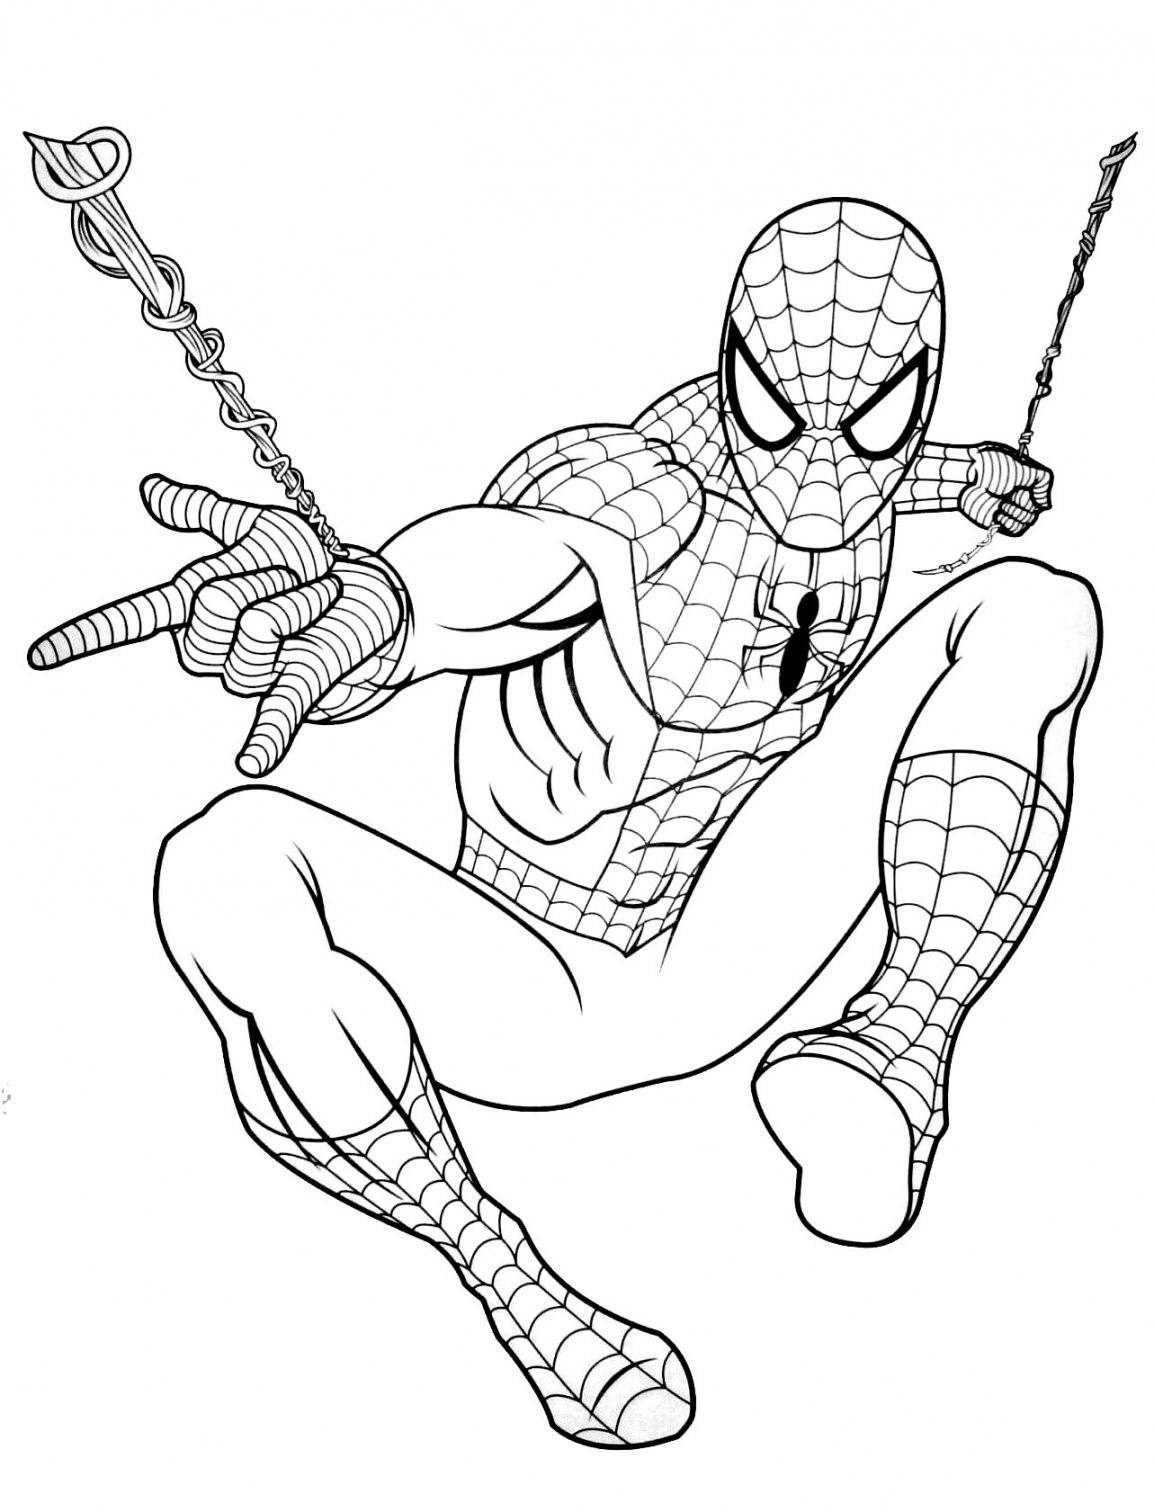 Free Spiderman drawing to print and color - Spiderman Kids  - FREE Printables - Spiderman Coloring Pages Free Printable